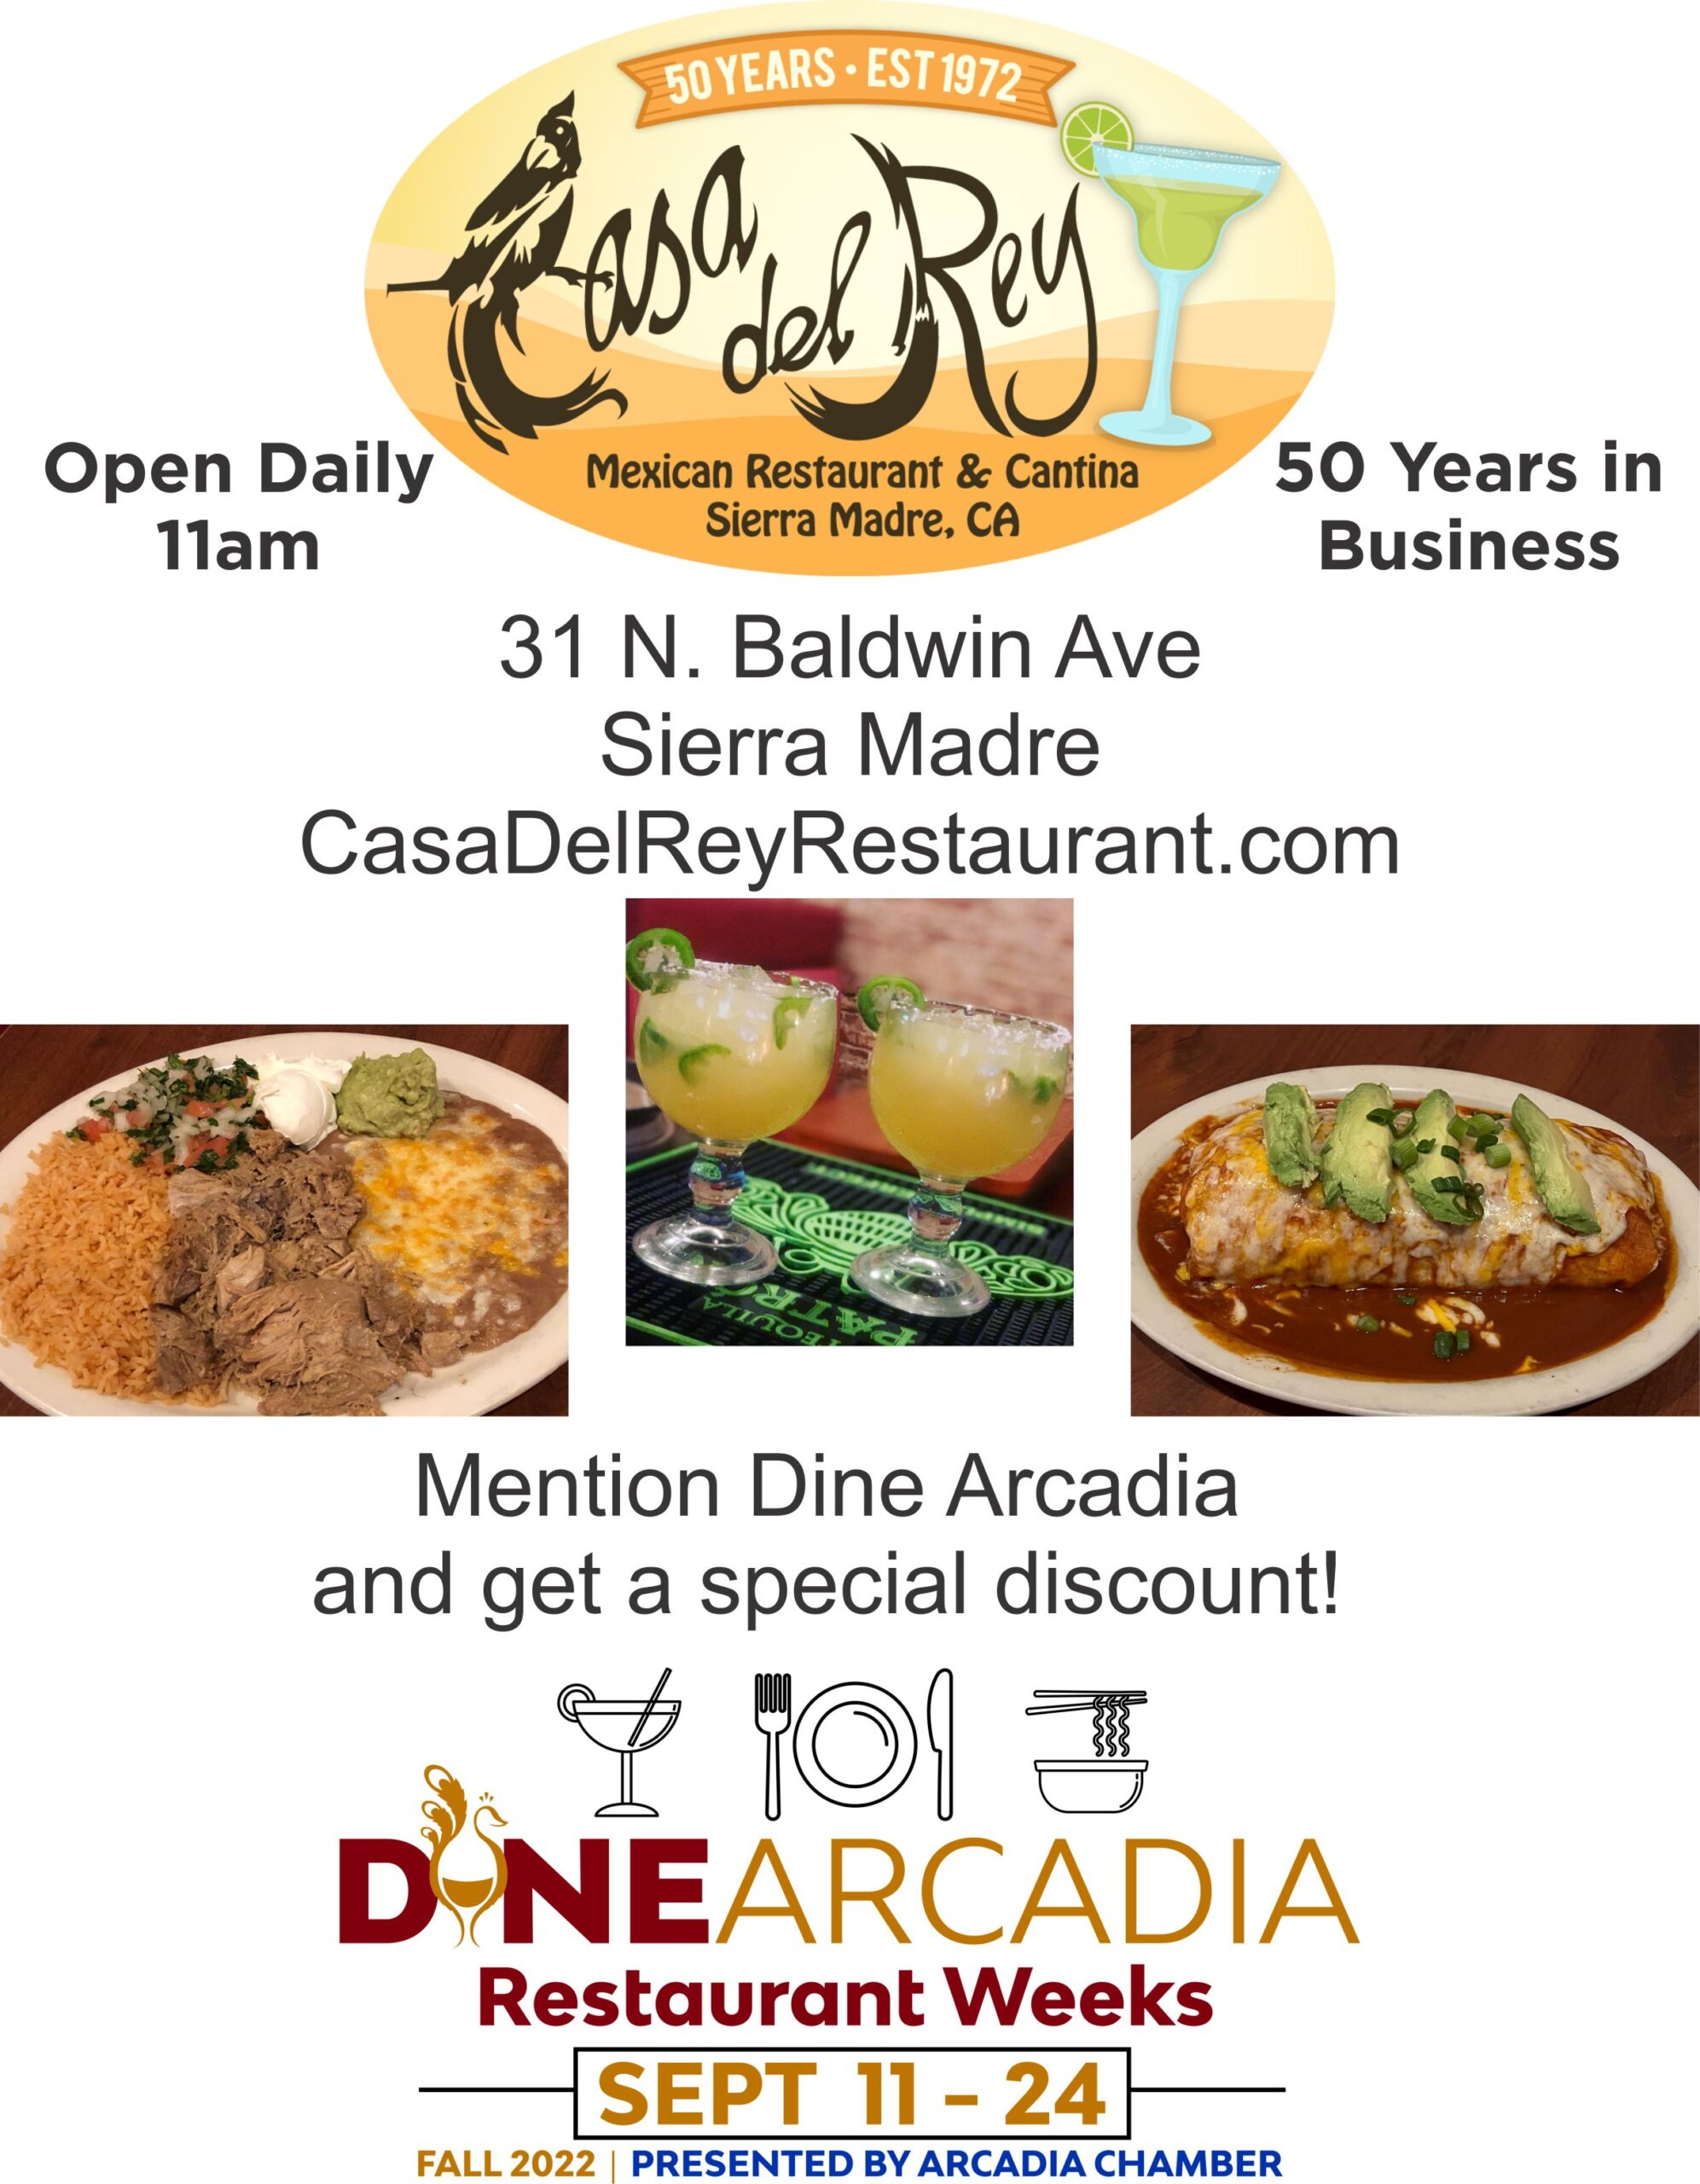 Casa Del Rey promotions for Dine Arcadia showing plates of Mexican food and margaritas